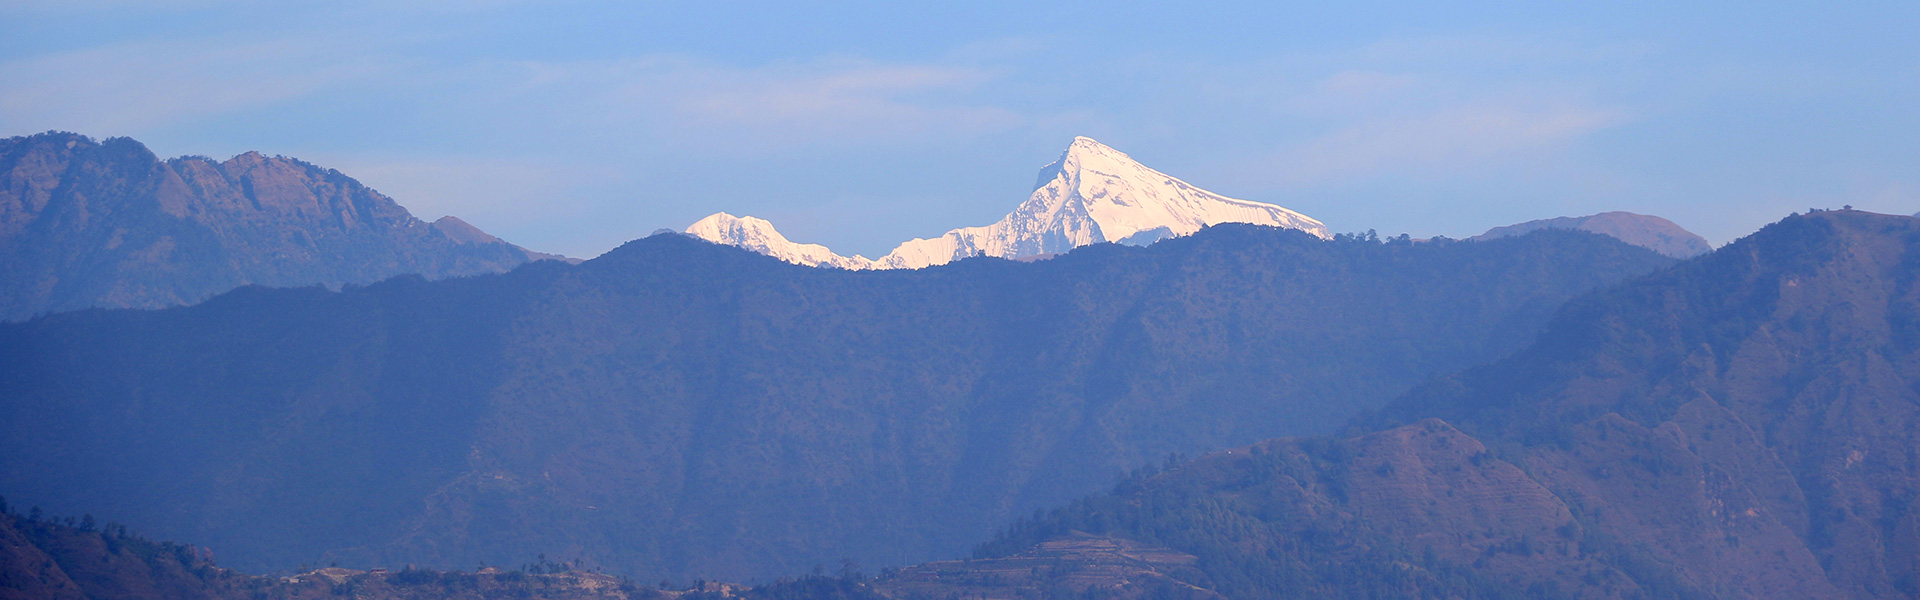 nepal-hills-and-mountains